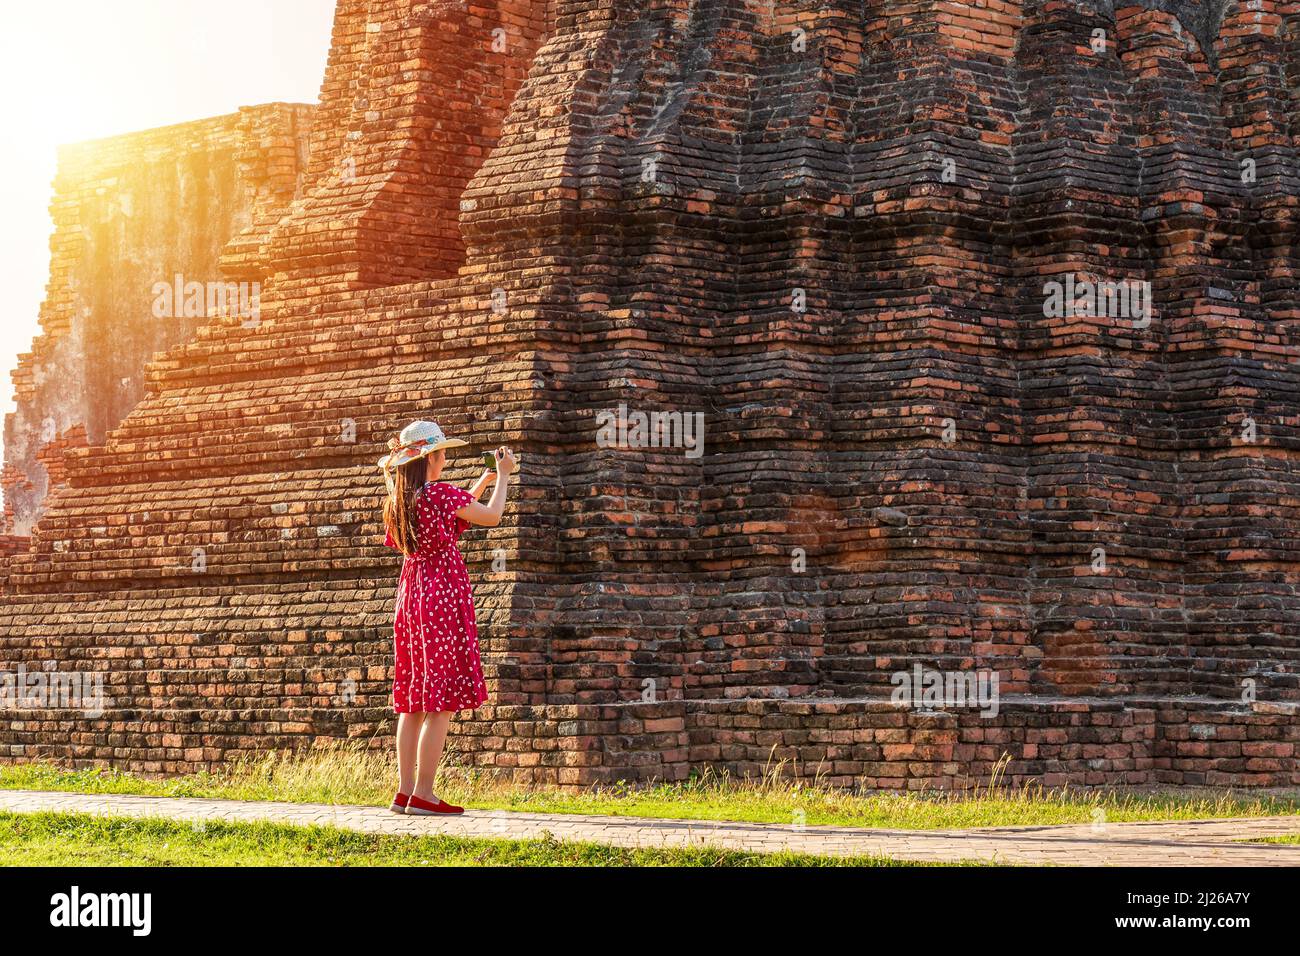 solo traveler concept. happy Asian woman tourist in red dress taking picture of old pagoda around history temple for cultural tourism at Ayutthaya Stock Photo